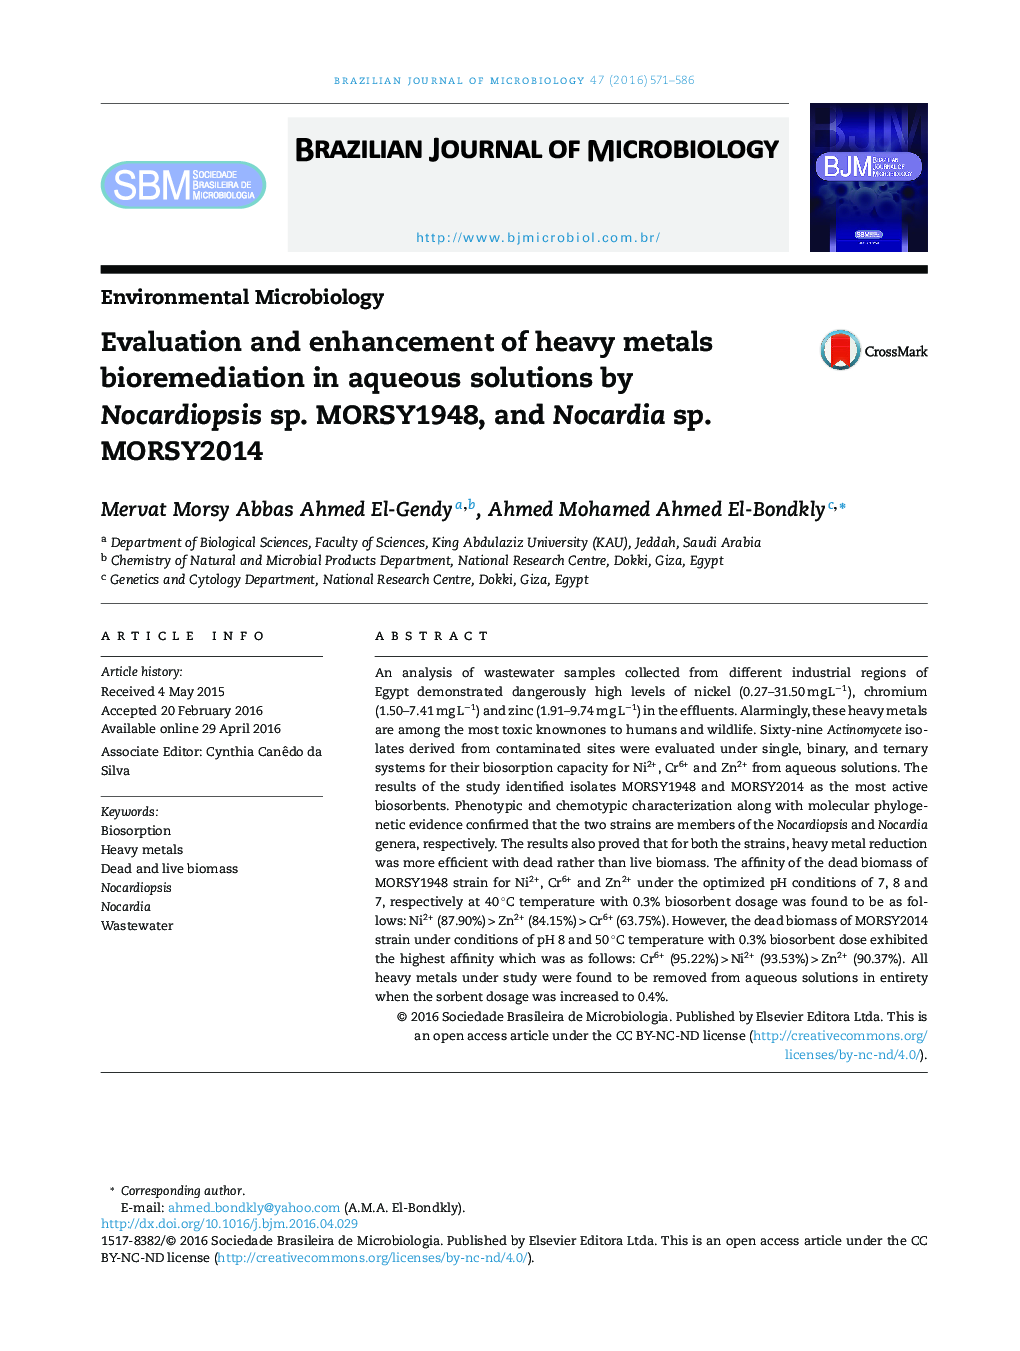 Evaluation and enhancement of heavy metals bioremediation in aqueous solutions by Nocardiopsis sp. MORSY1948, and Nocardia sp. MORSY2014